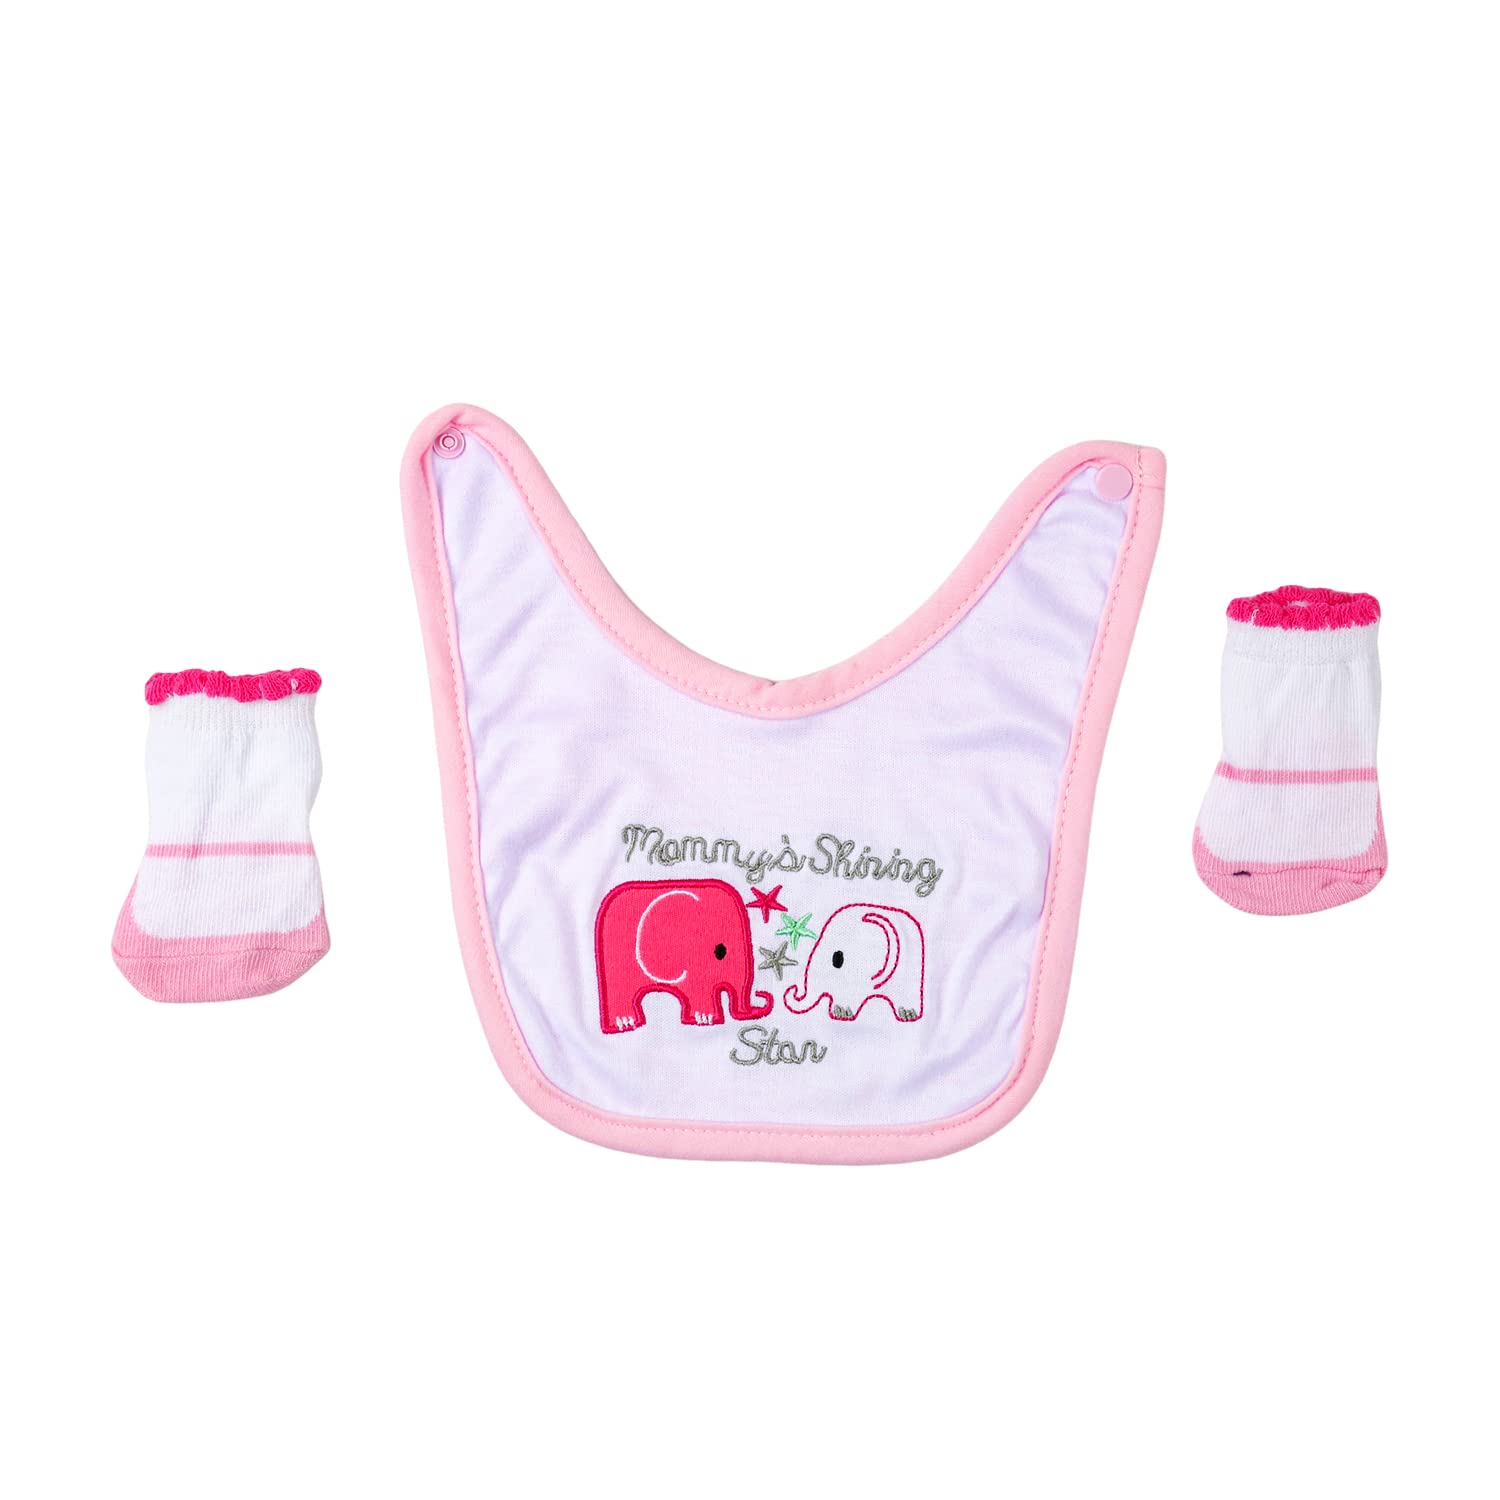 CARANOVO Reborn Baby Doll Clothes 22 inch Pink Elephant 6pcs Outfit Accessories Set for 18-22 Inch Reborn Doll